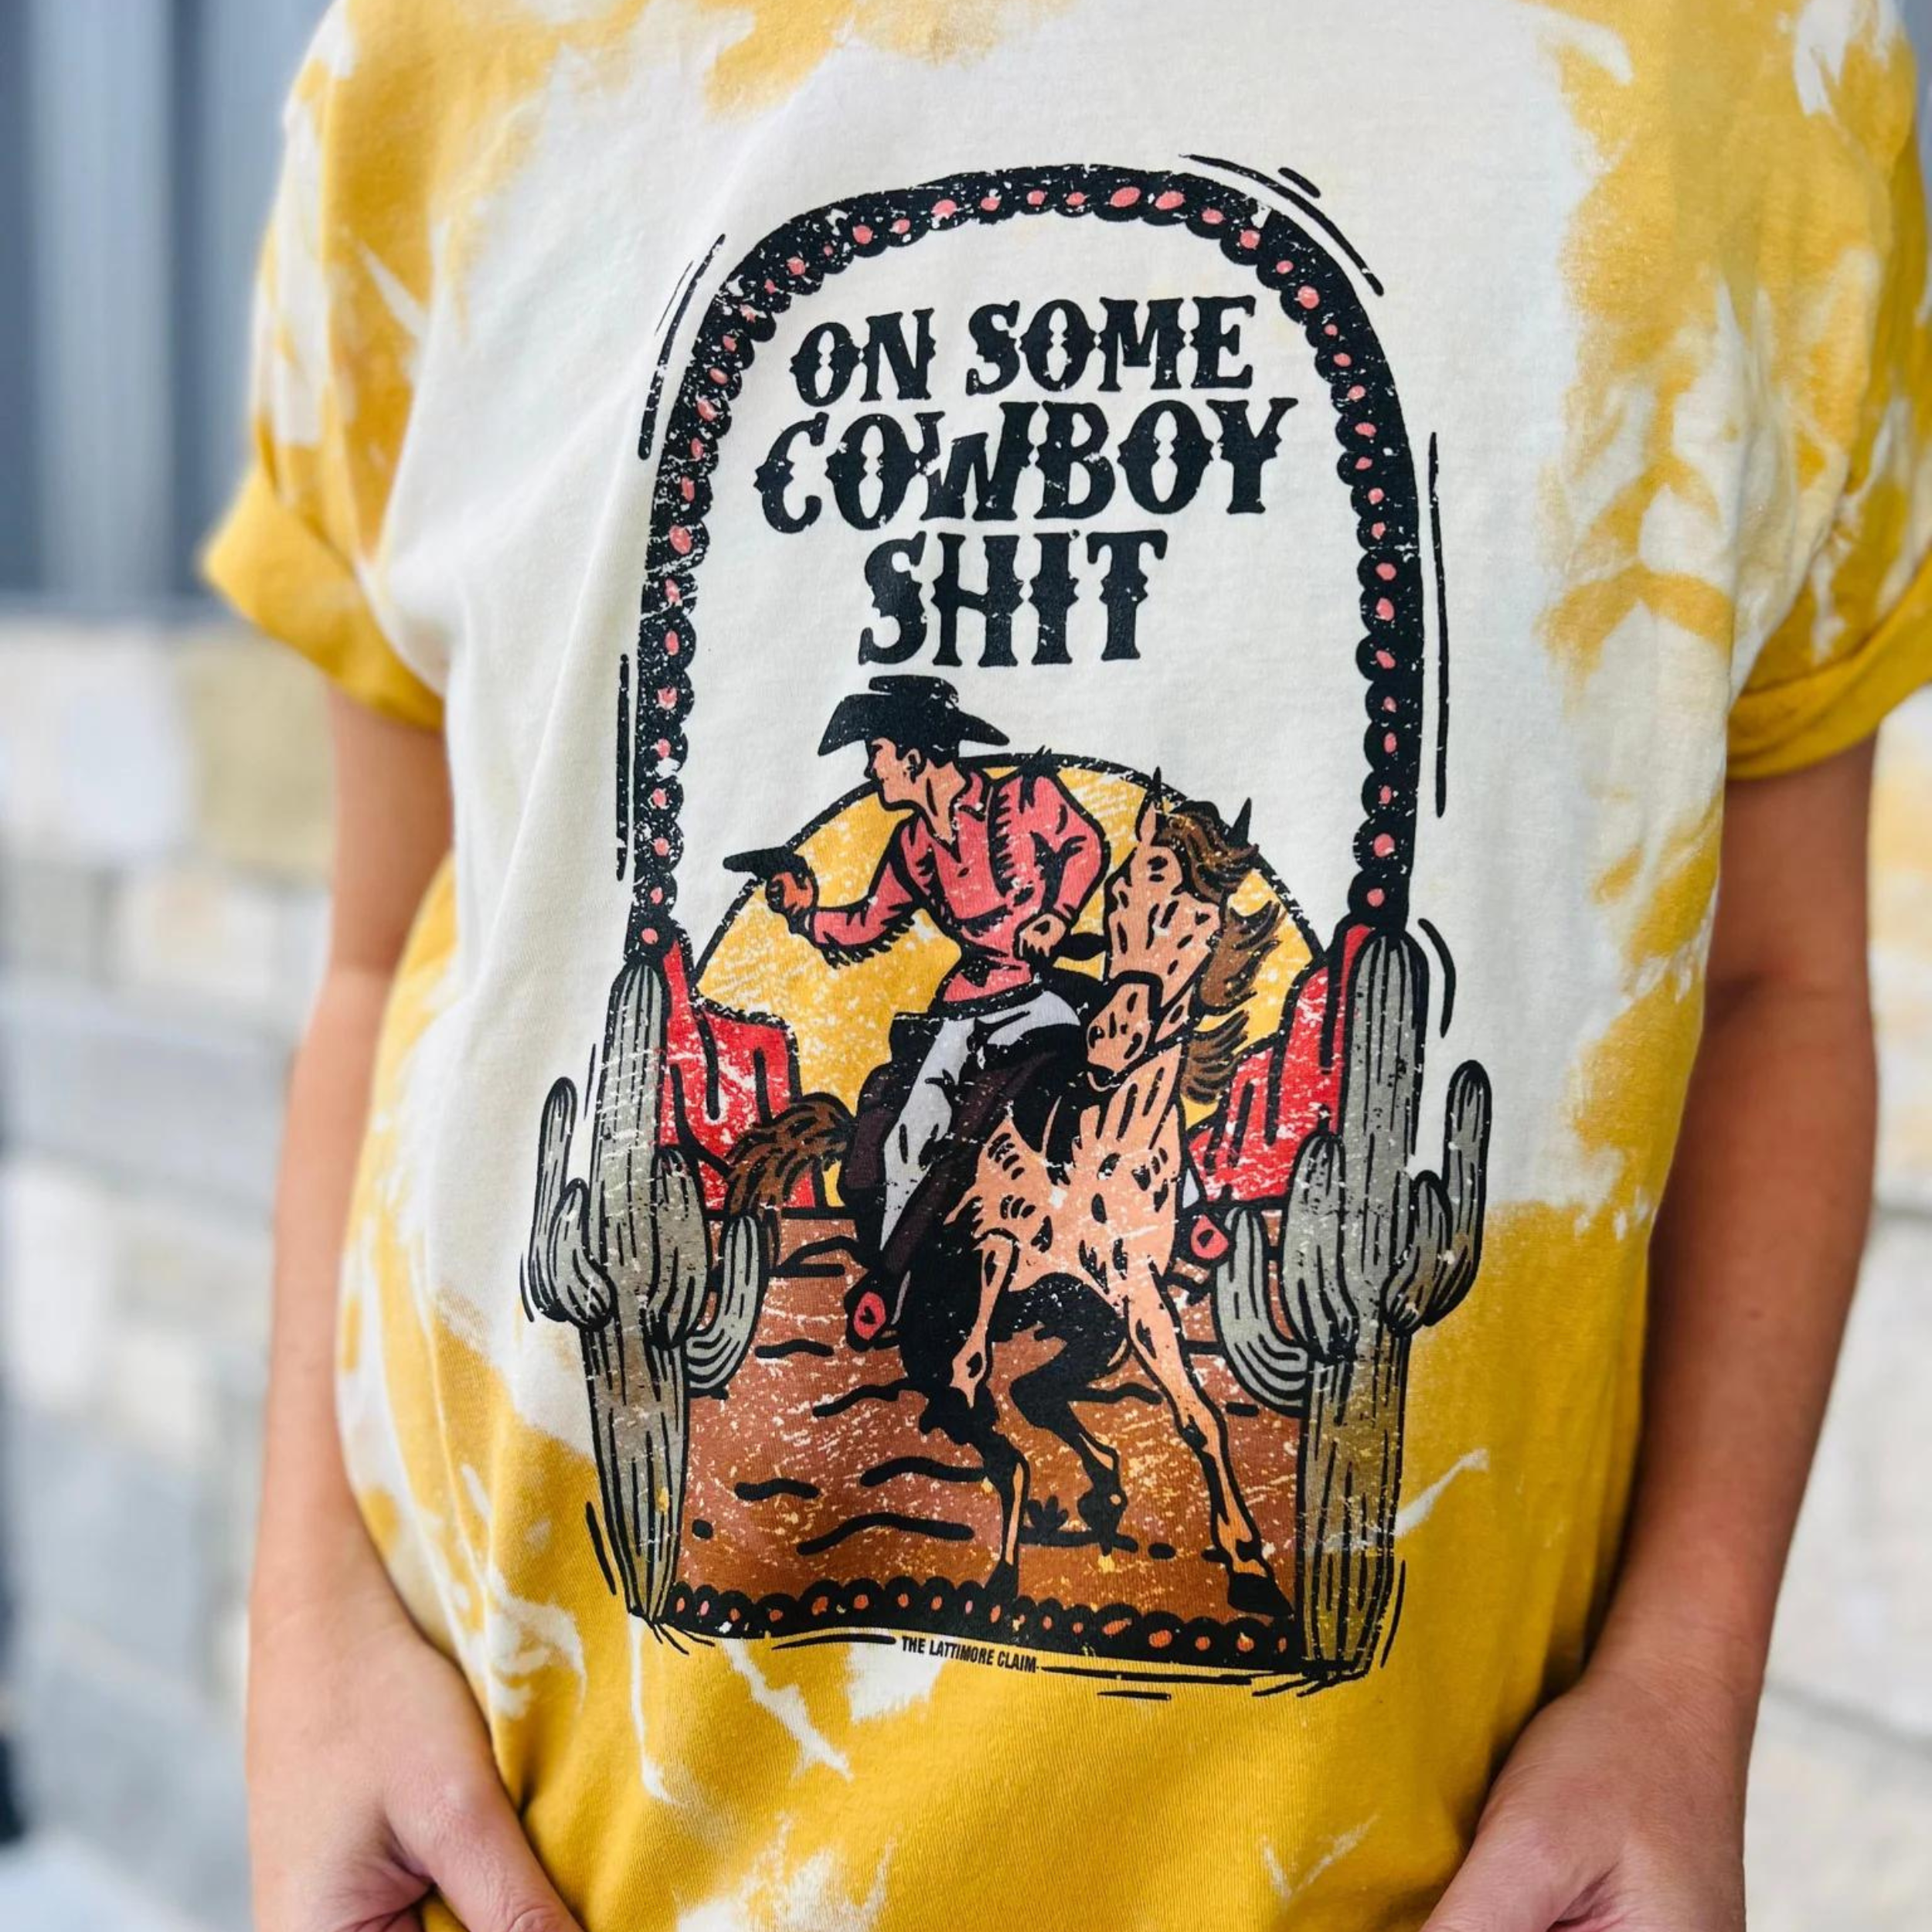 An orange with a bleach splatter pattern short sleeve crewneck tee with a graphic of a cowboy and his horse in the desert. The text "On some cowboy sh*t" is centered above the graphic. The item is pictured on a heather grey background